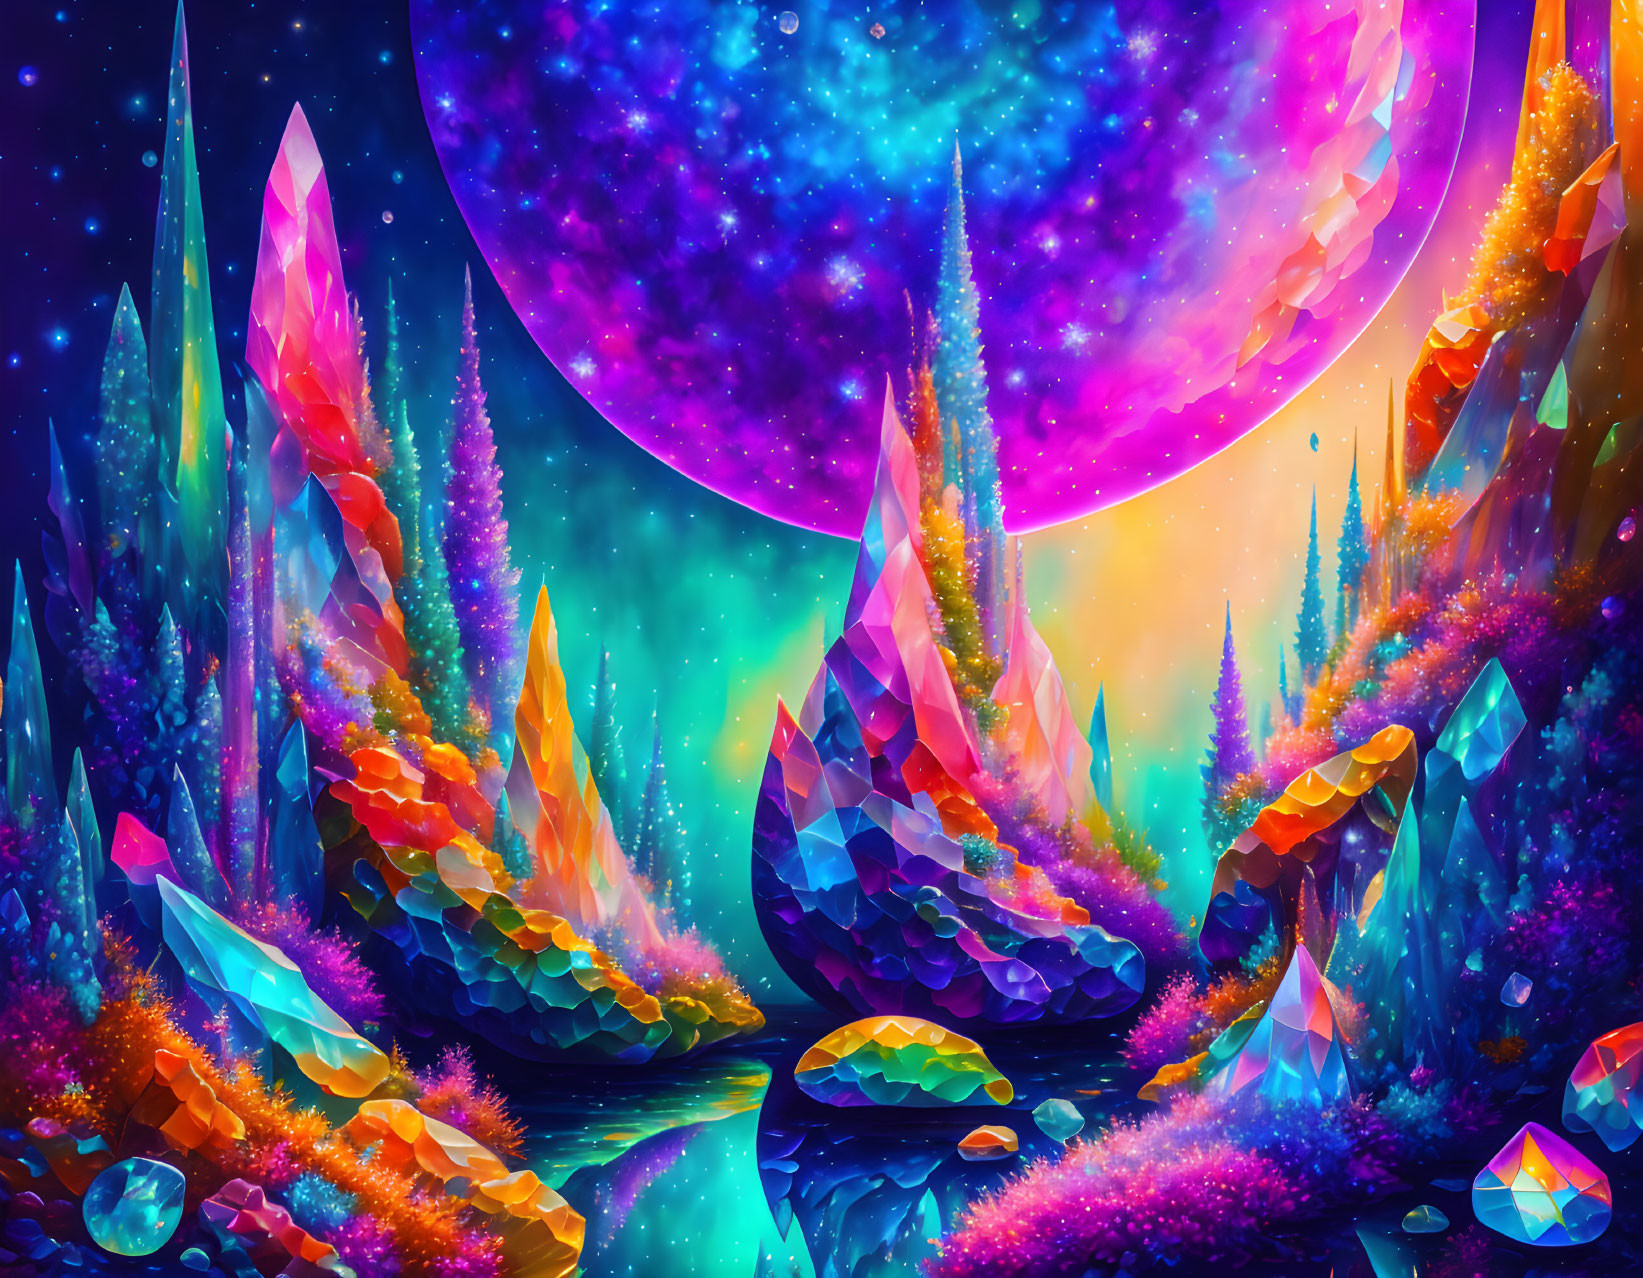 Colorful Crystal Formations in Vibrant Fantasy Landscape